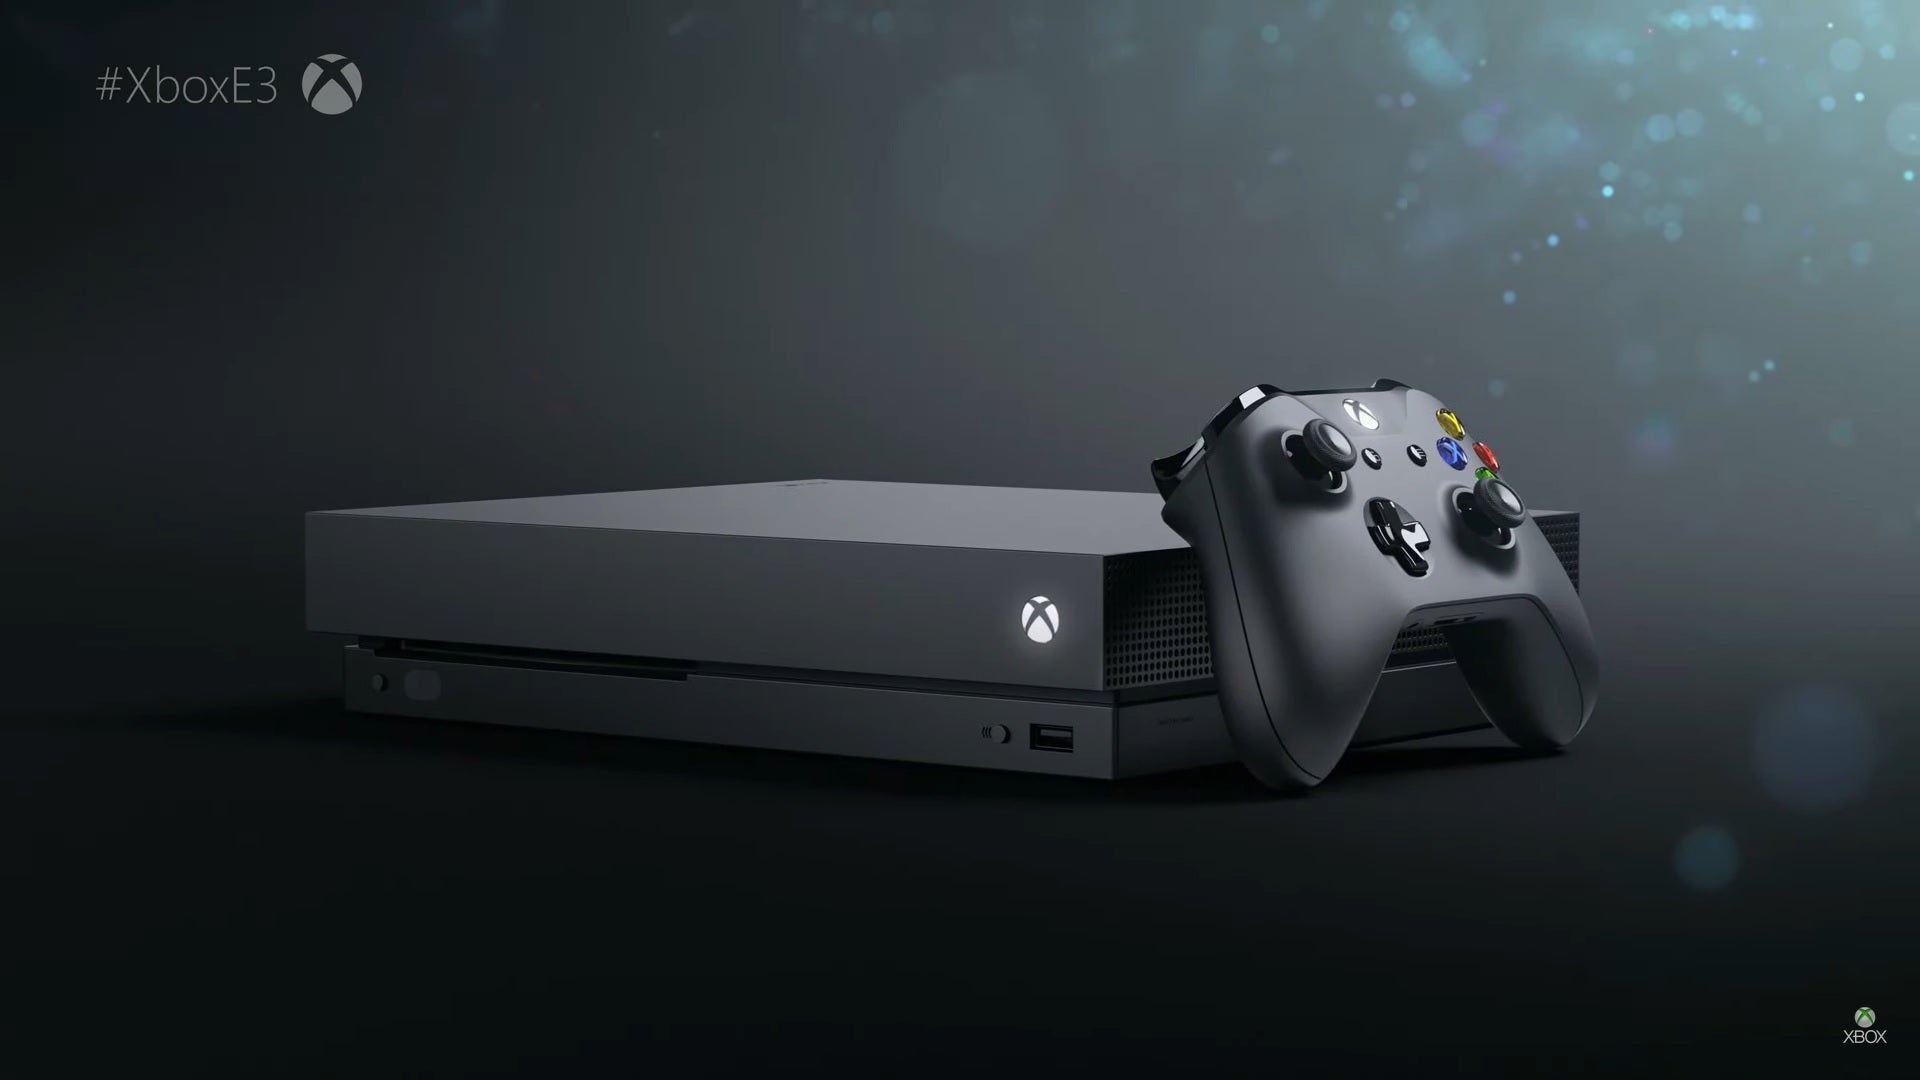 Image for Microsoft "proud" of Xbox One X price - "we did not build this to be a low price box"